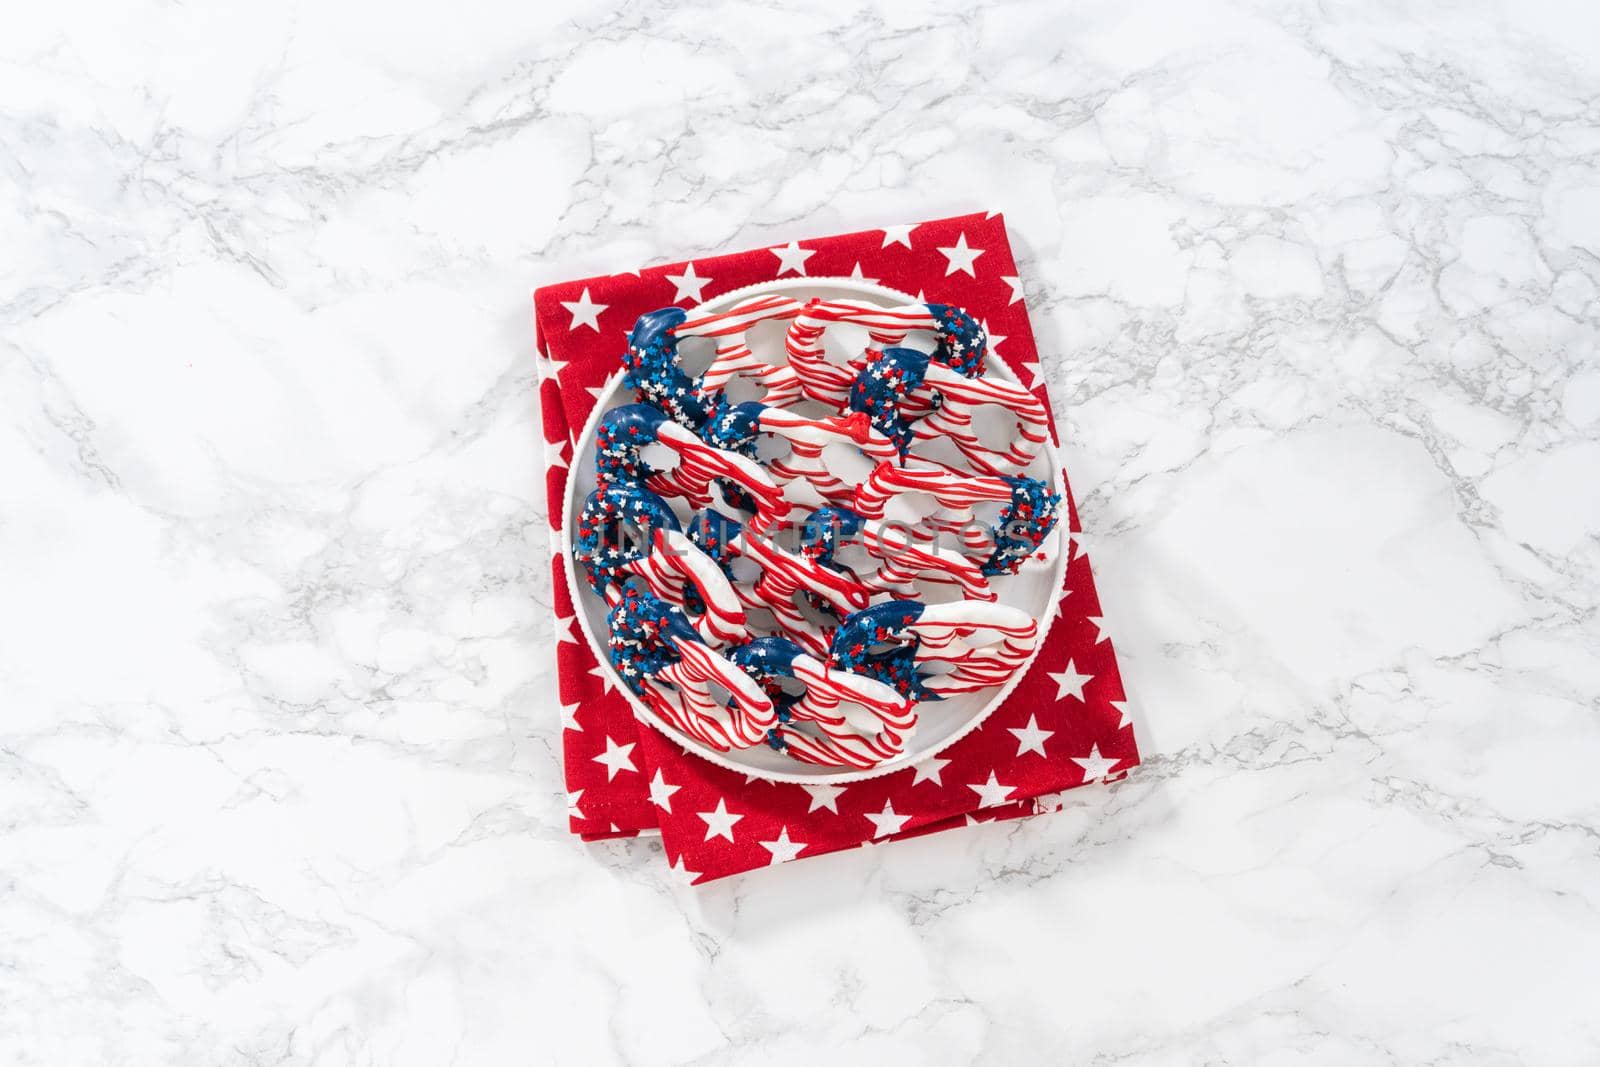 Flat lay. American flag. Red, white, and blue chocolate-covered pretzel twists.